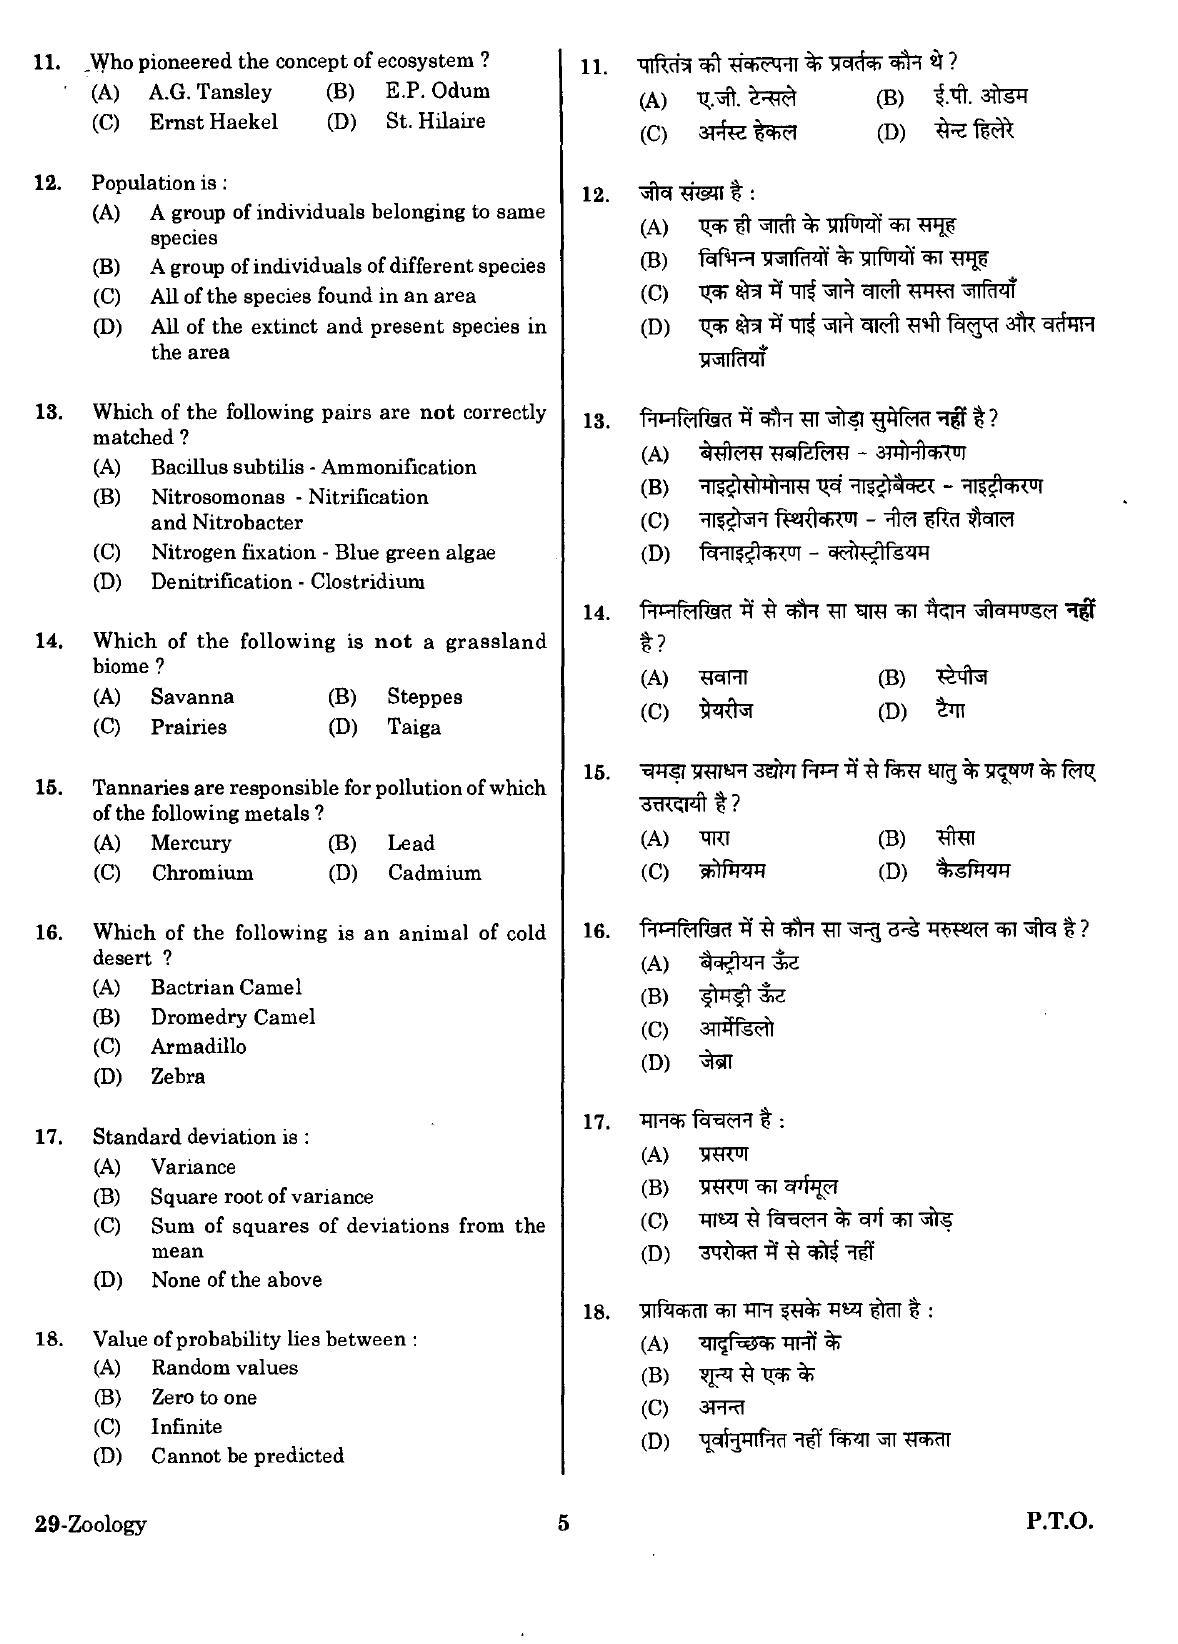 URATPG Zoology Sample Question Paper 2018 - Page 4